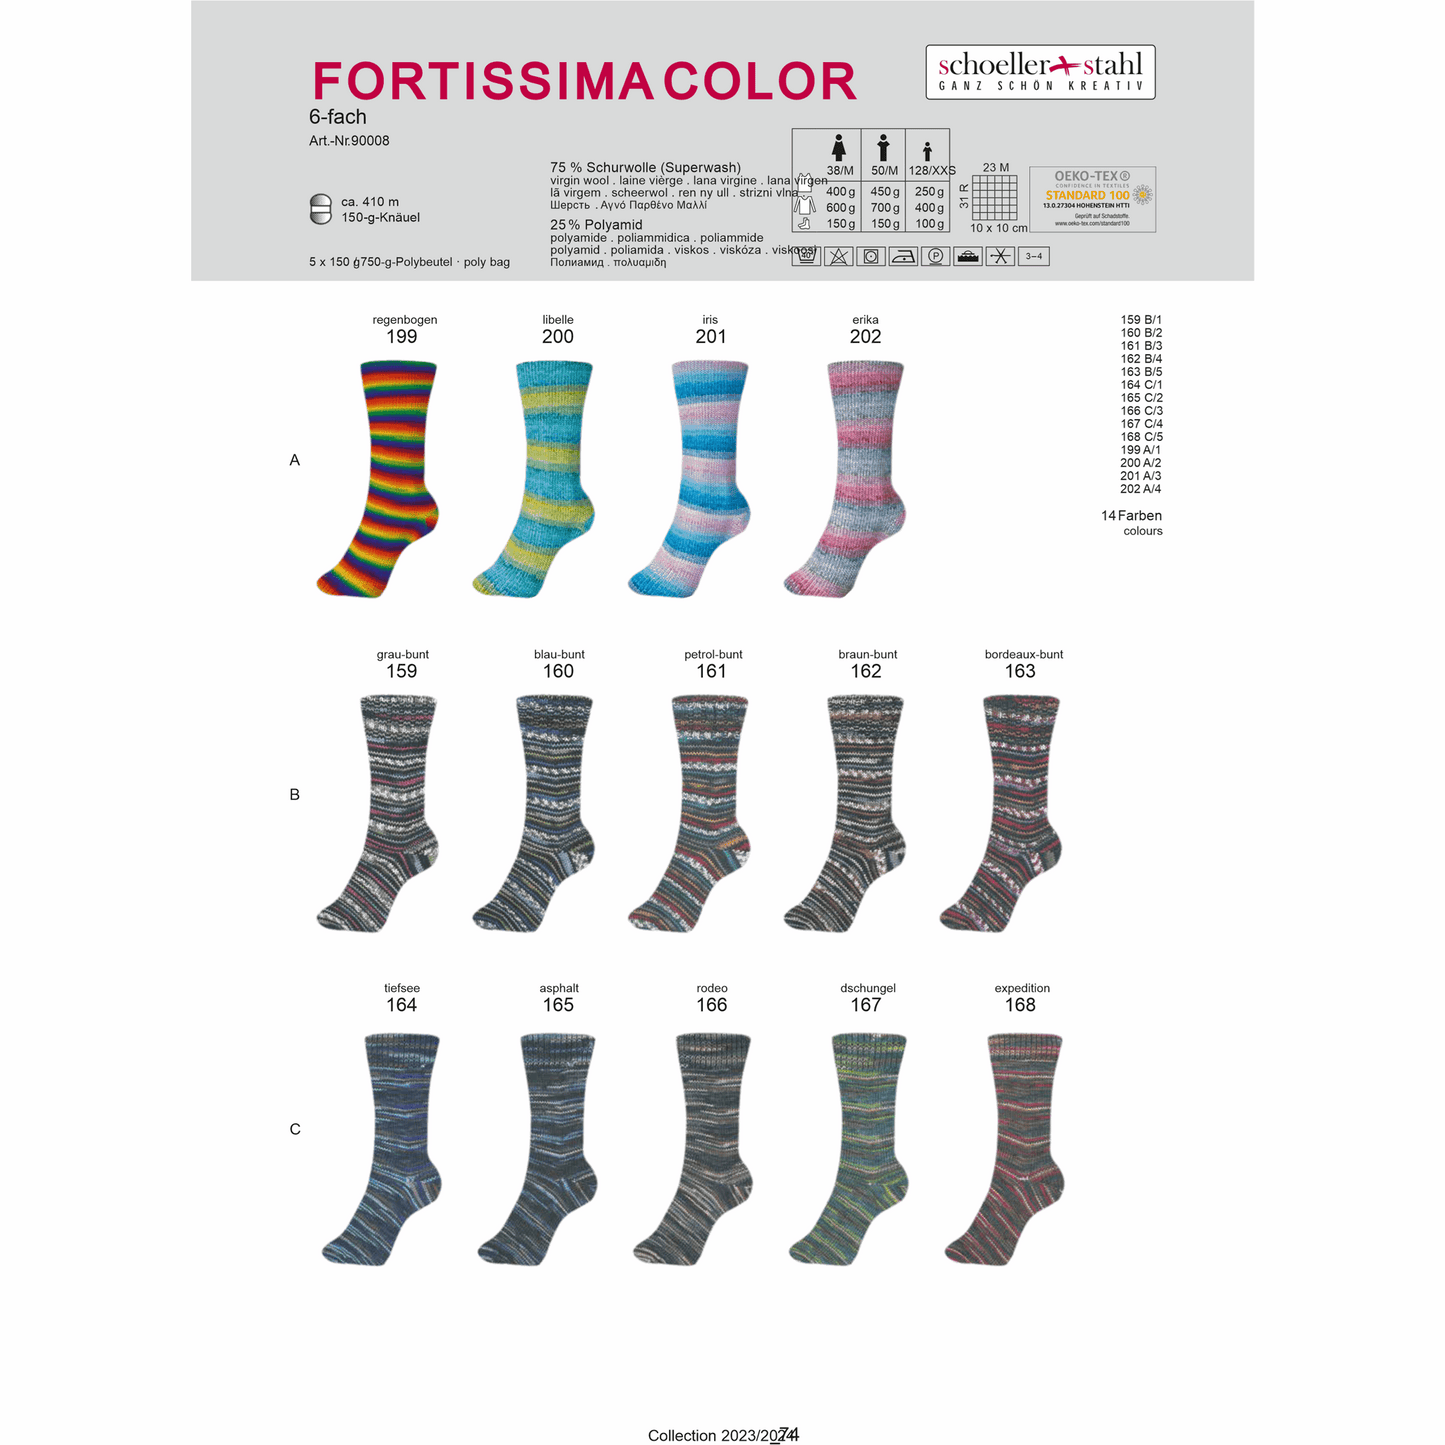 Fortissima 6-thread 150g color, 90008, color 202, heather